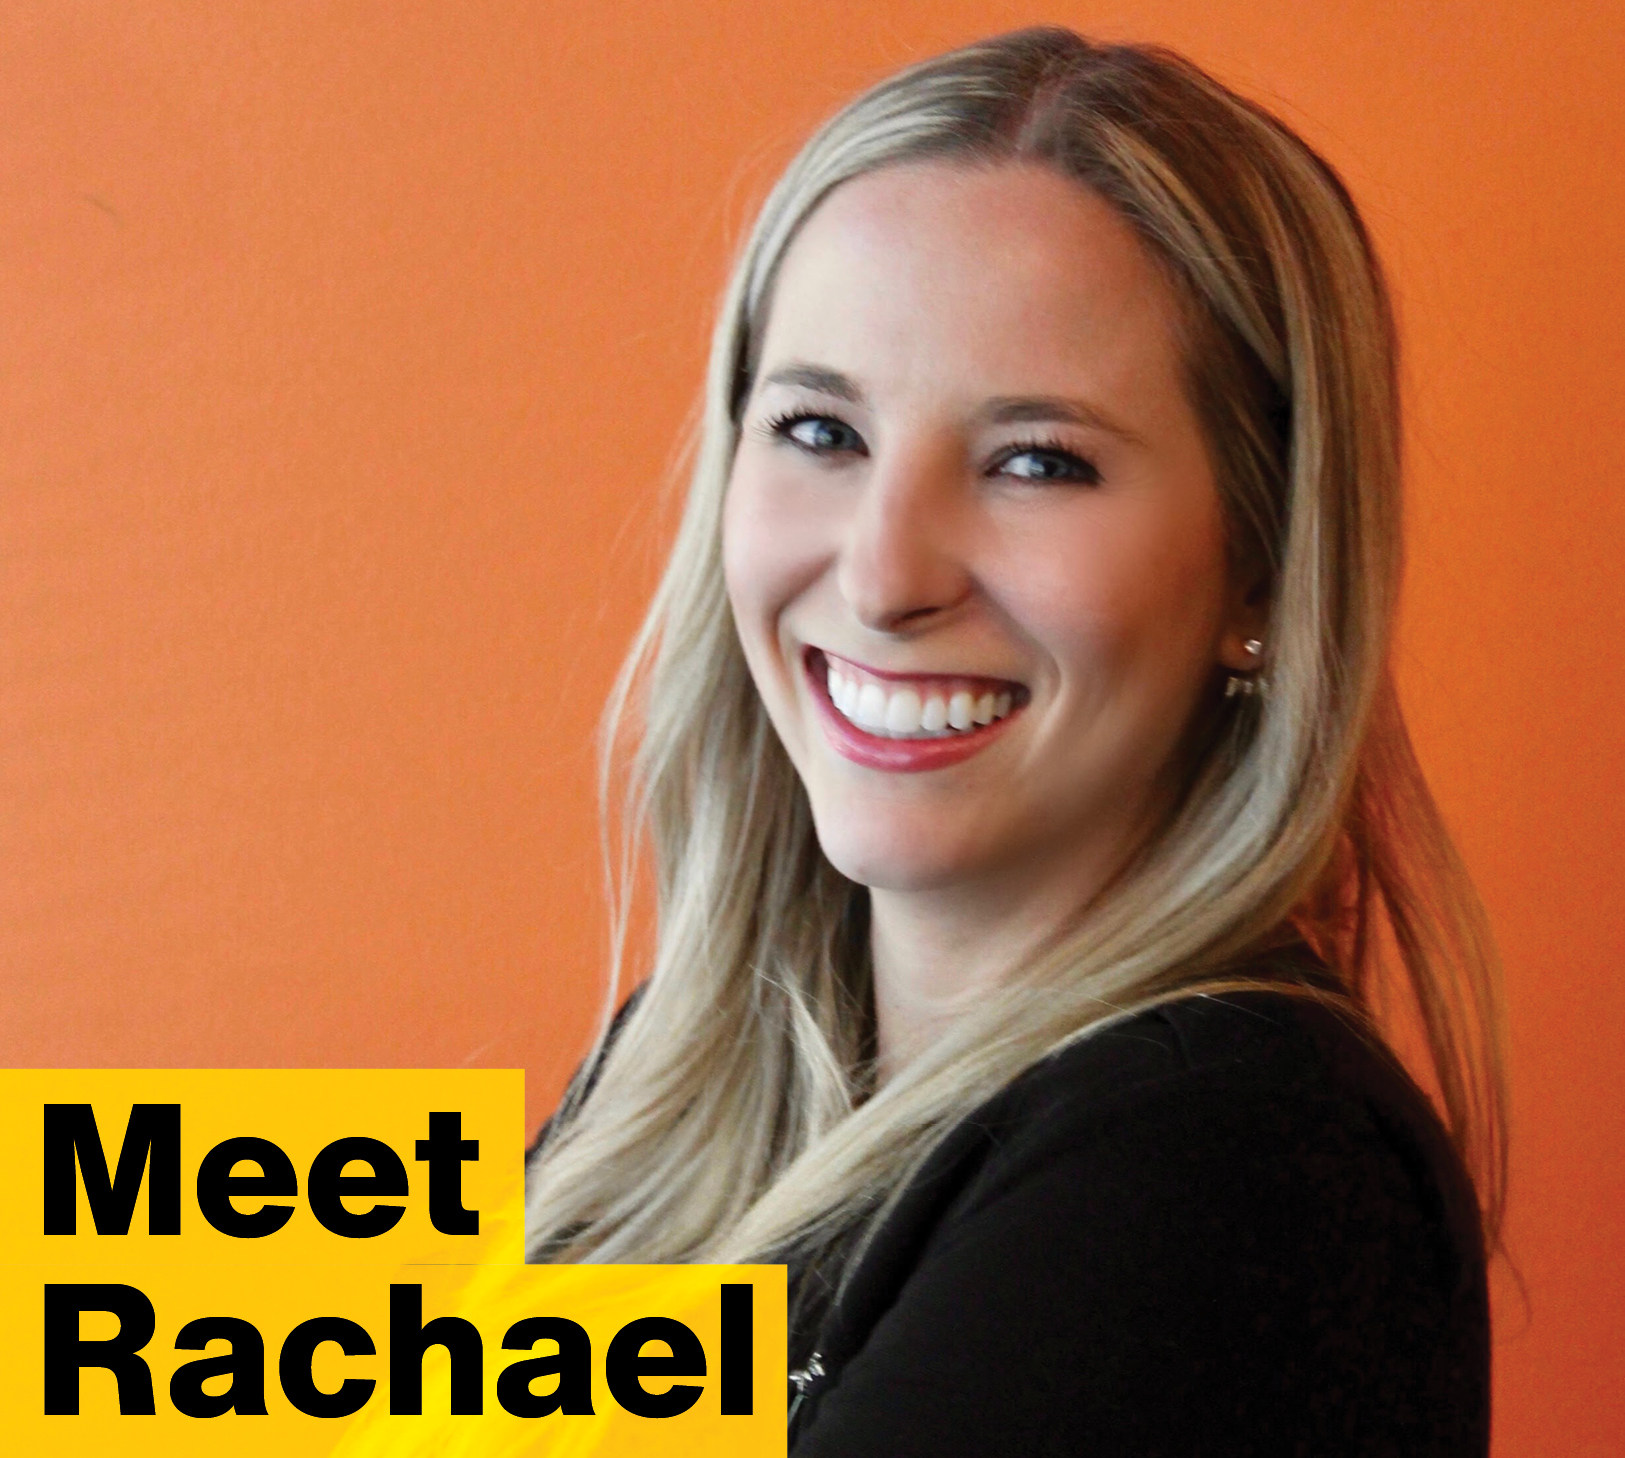 Five Questions With: Rachael Brandon Young